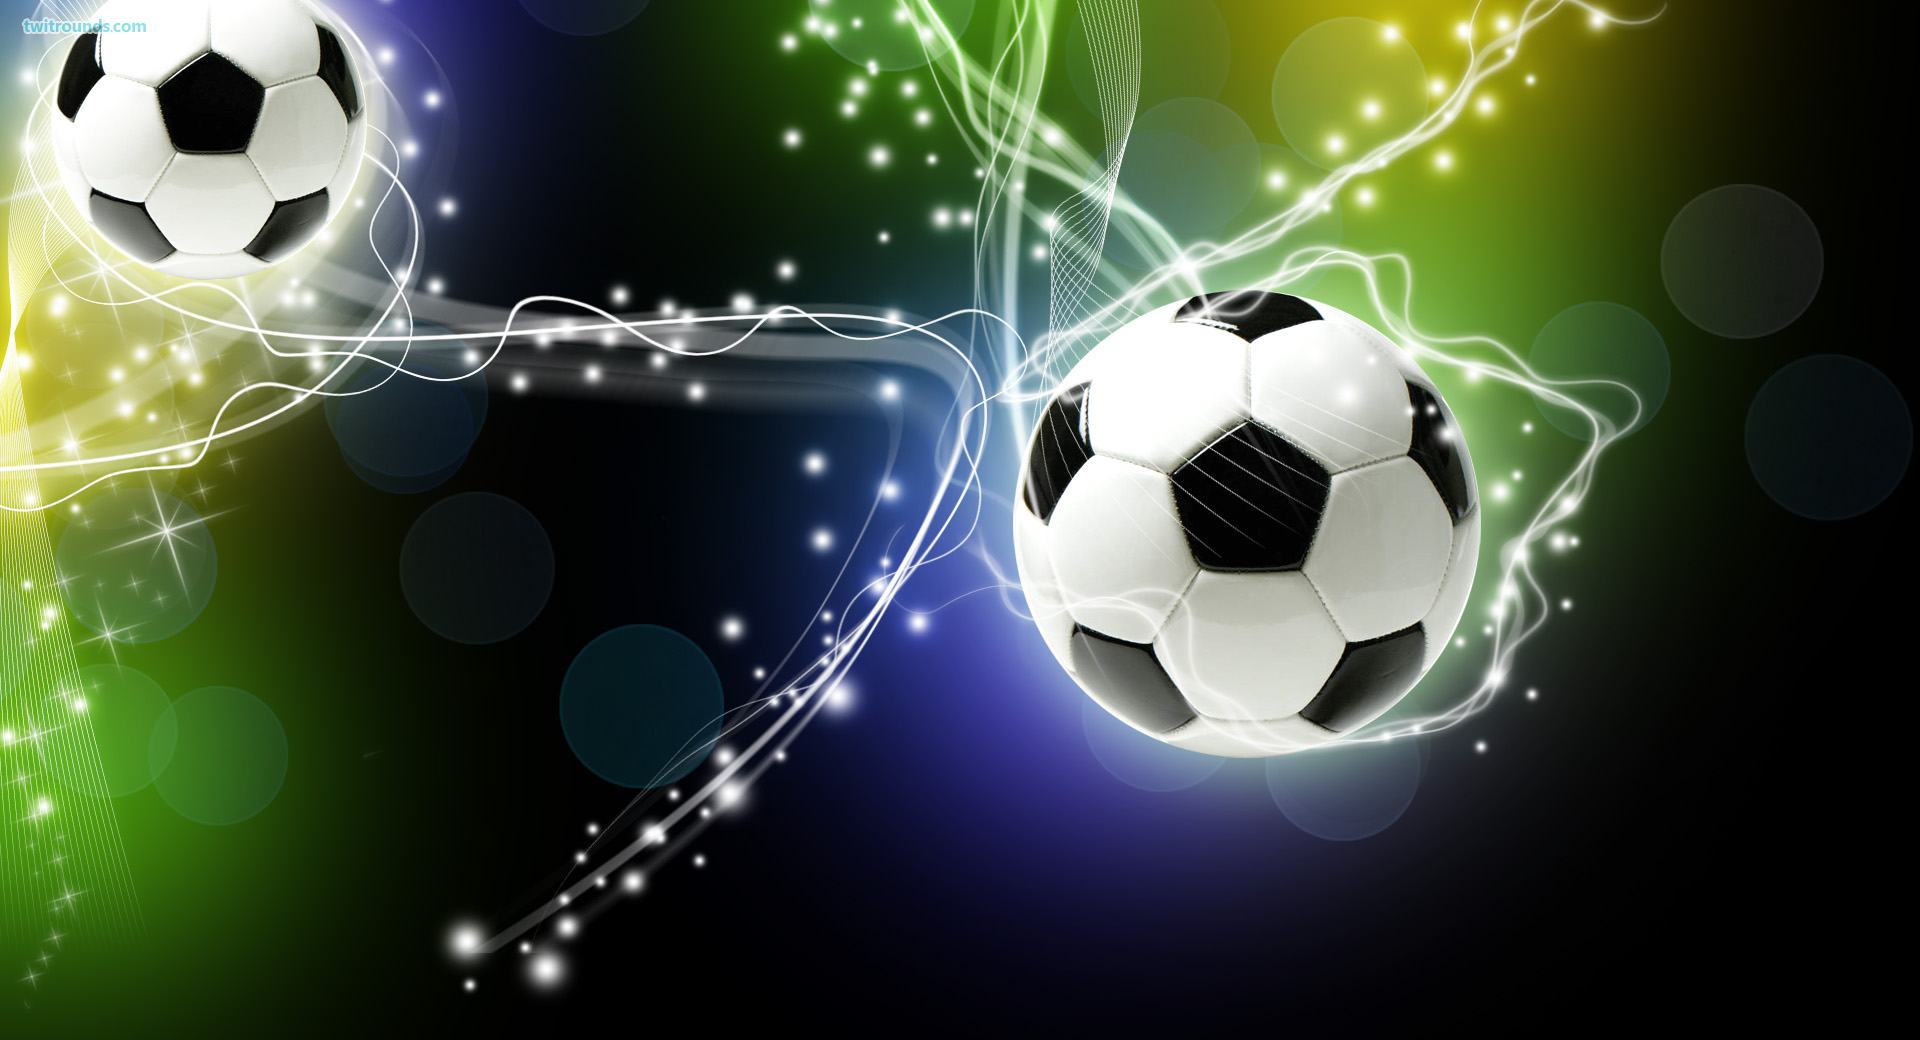 Awesome Soccer Backgrounds